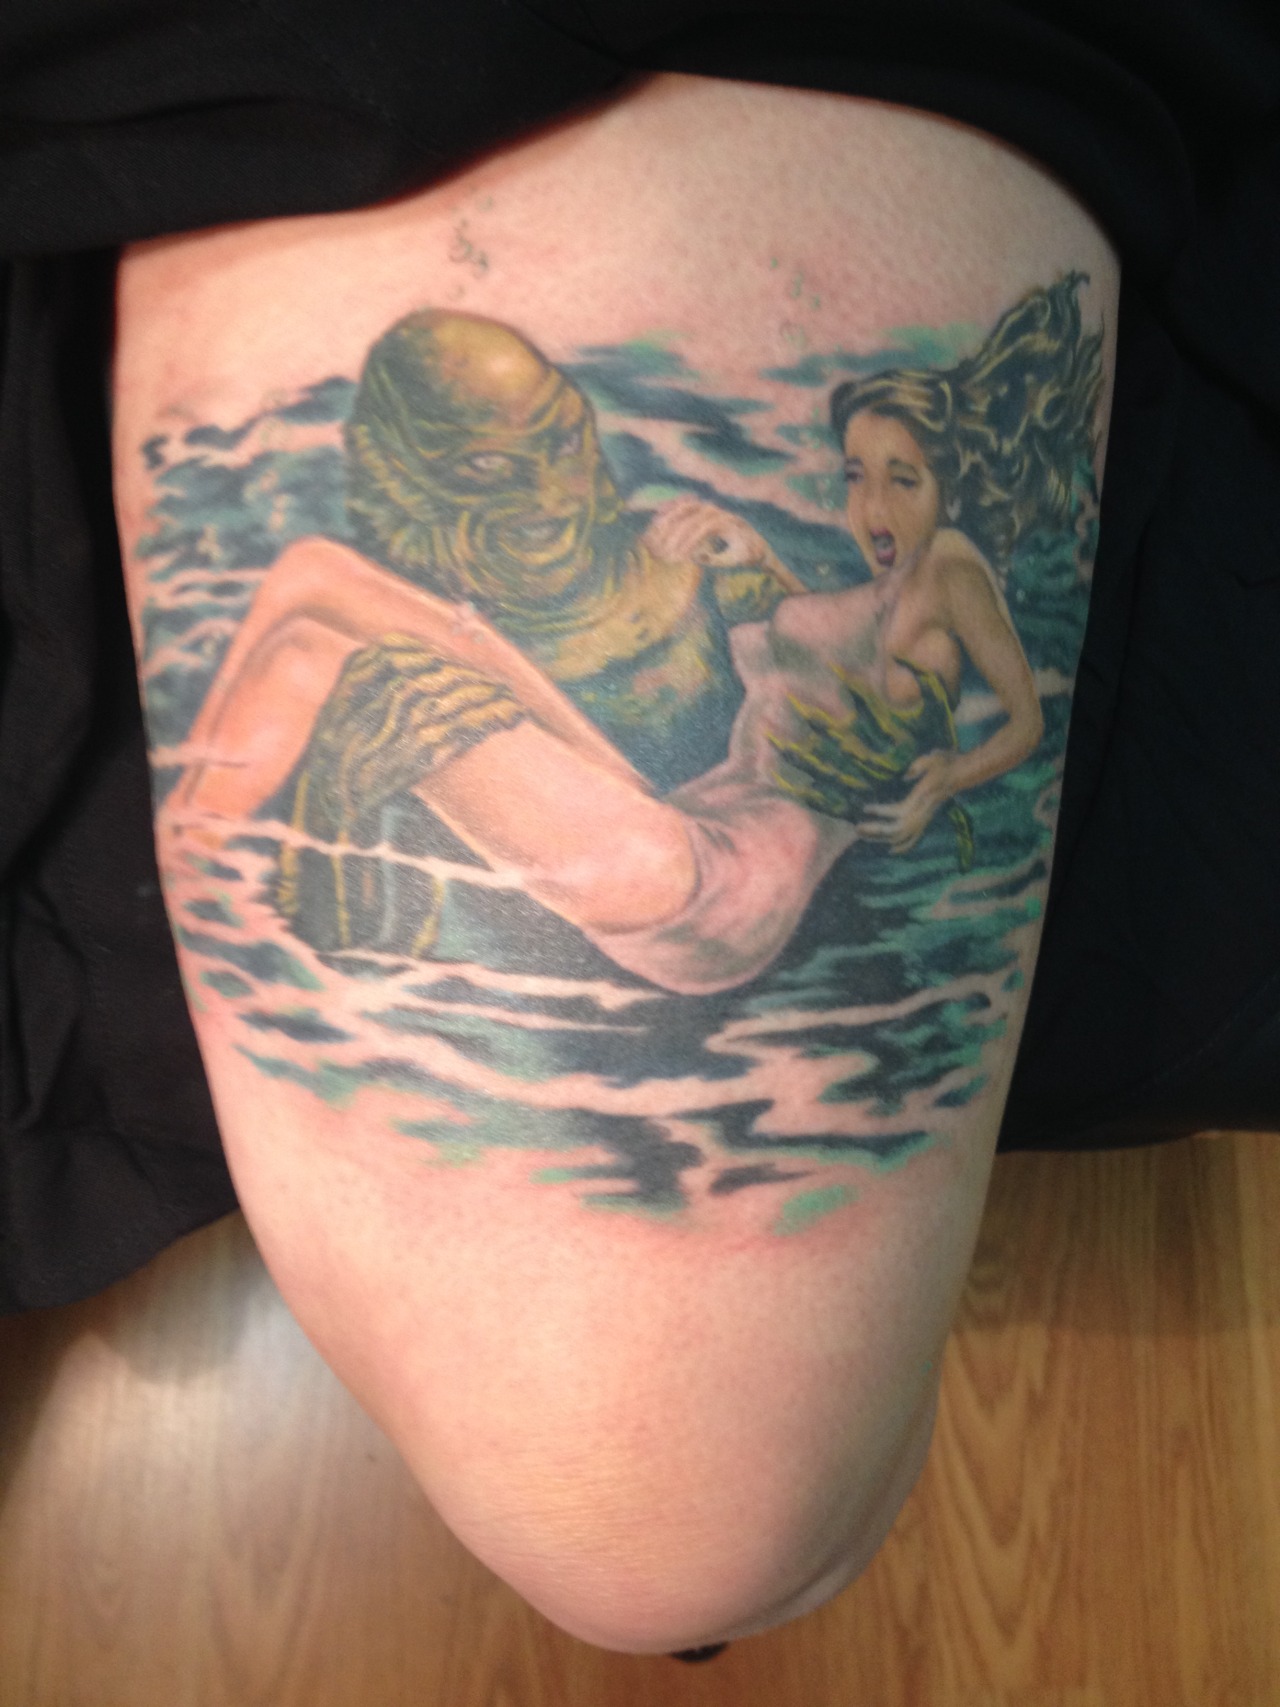  — Creature From the Black Lagoon on my thigh by Dan...